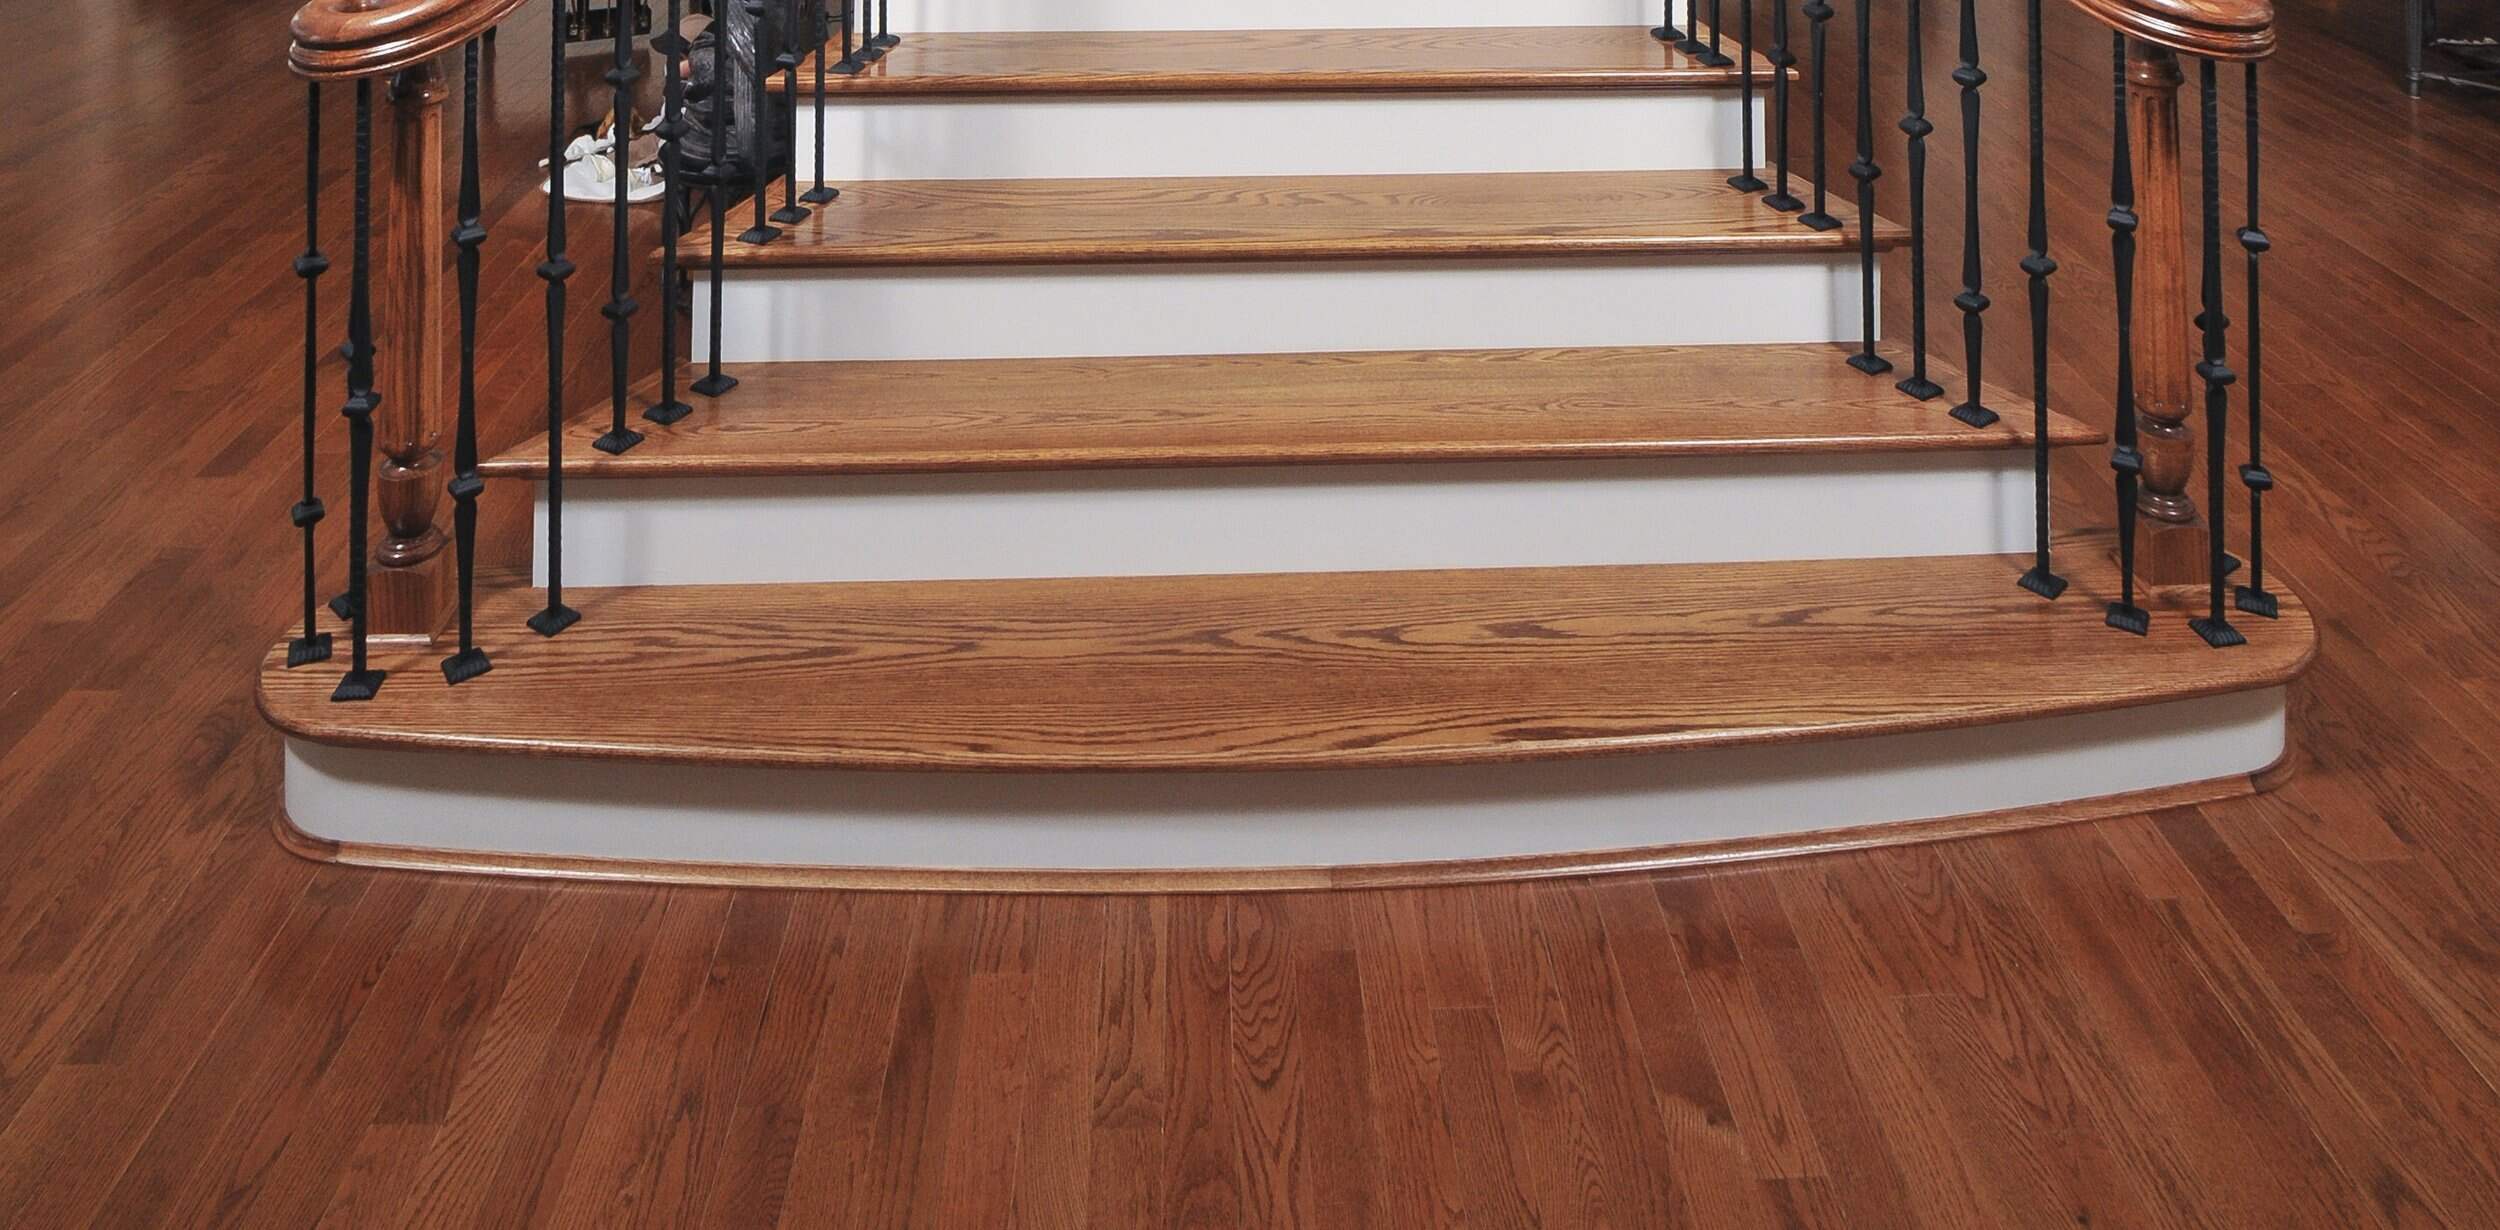 Oak Stairs steps Cladding Kit For Stairs,13 risers and treads